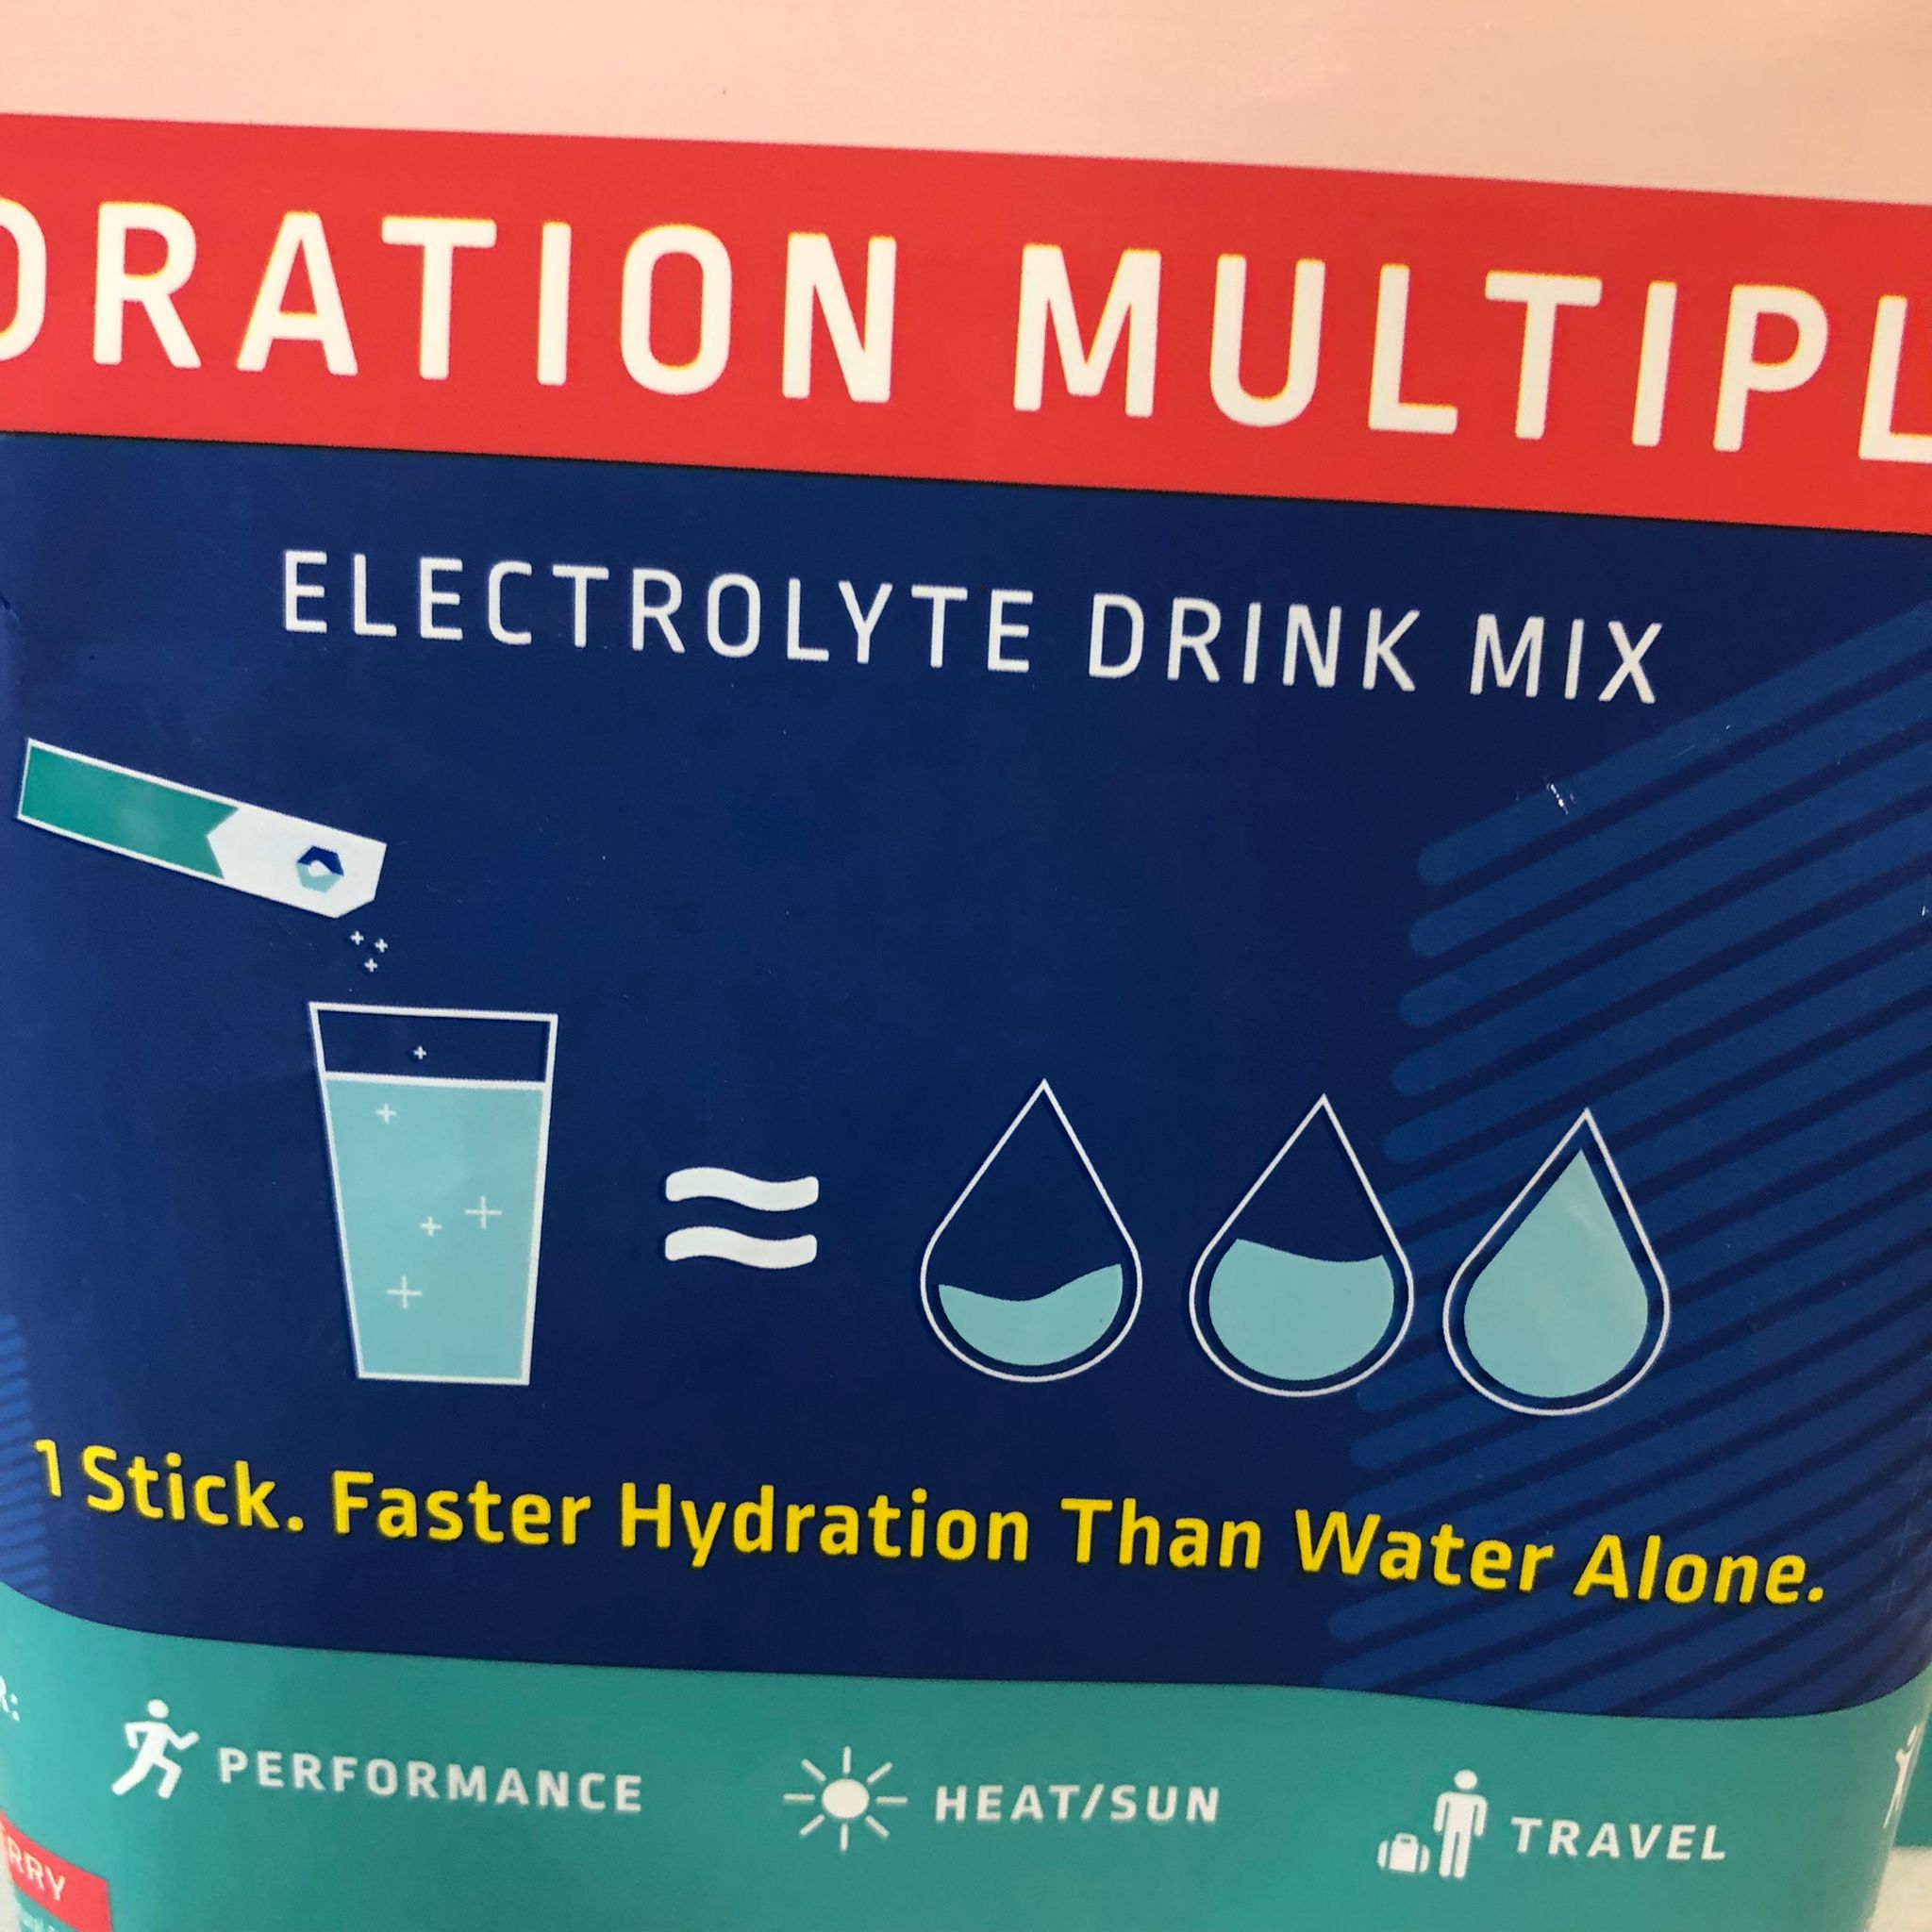 As is Liquid I.V. Hydration Multiplier 28-Pack - Strawberry